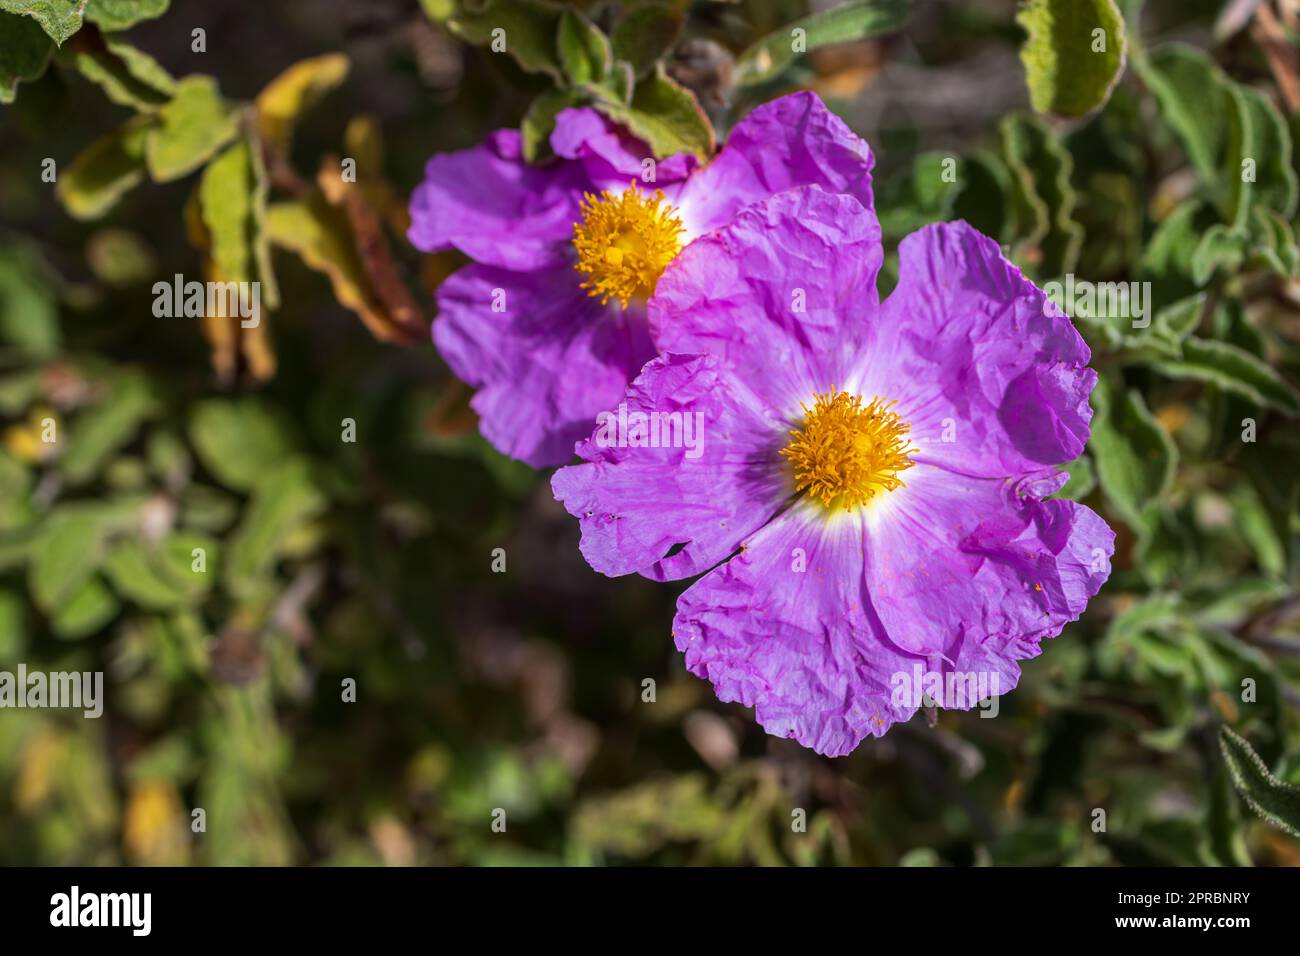 Cistus creticus is a species of shrubby plant in the family Cistaceae. Stock Photo